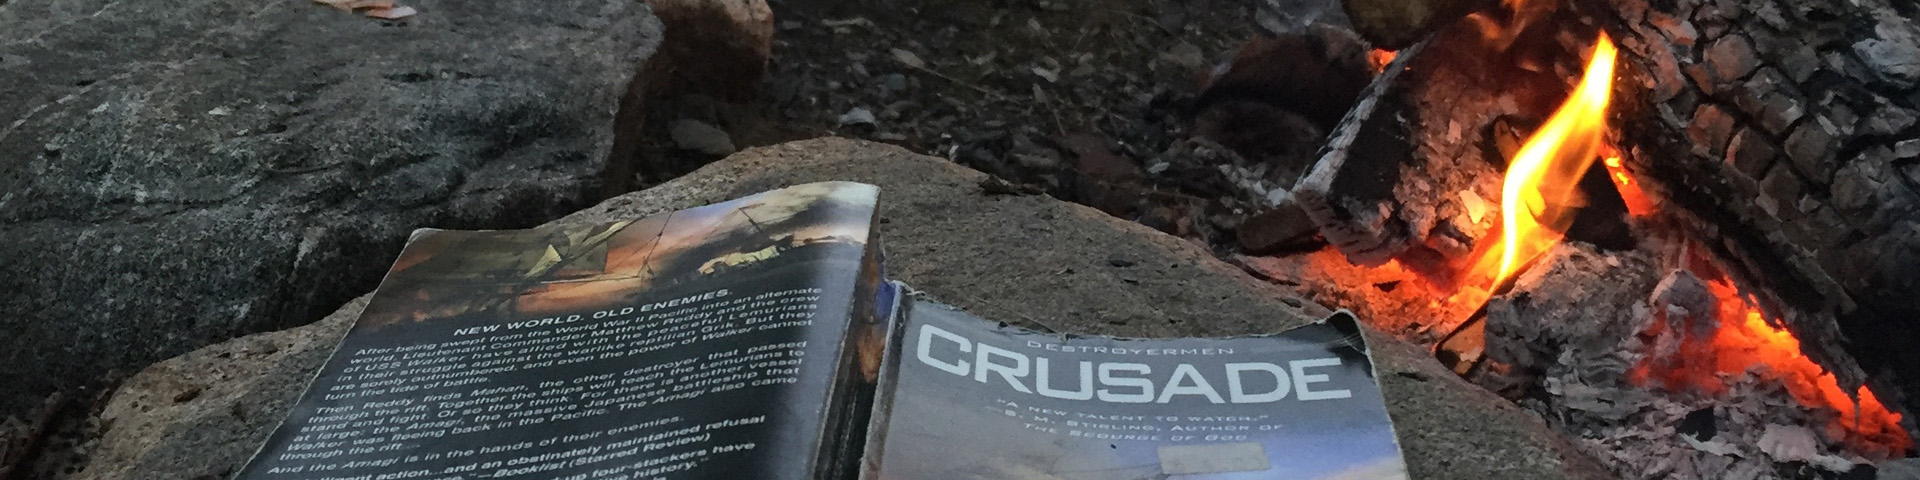 The paperback book "Crusade" lies face down on a rock next to a fire.